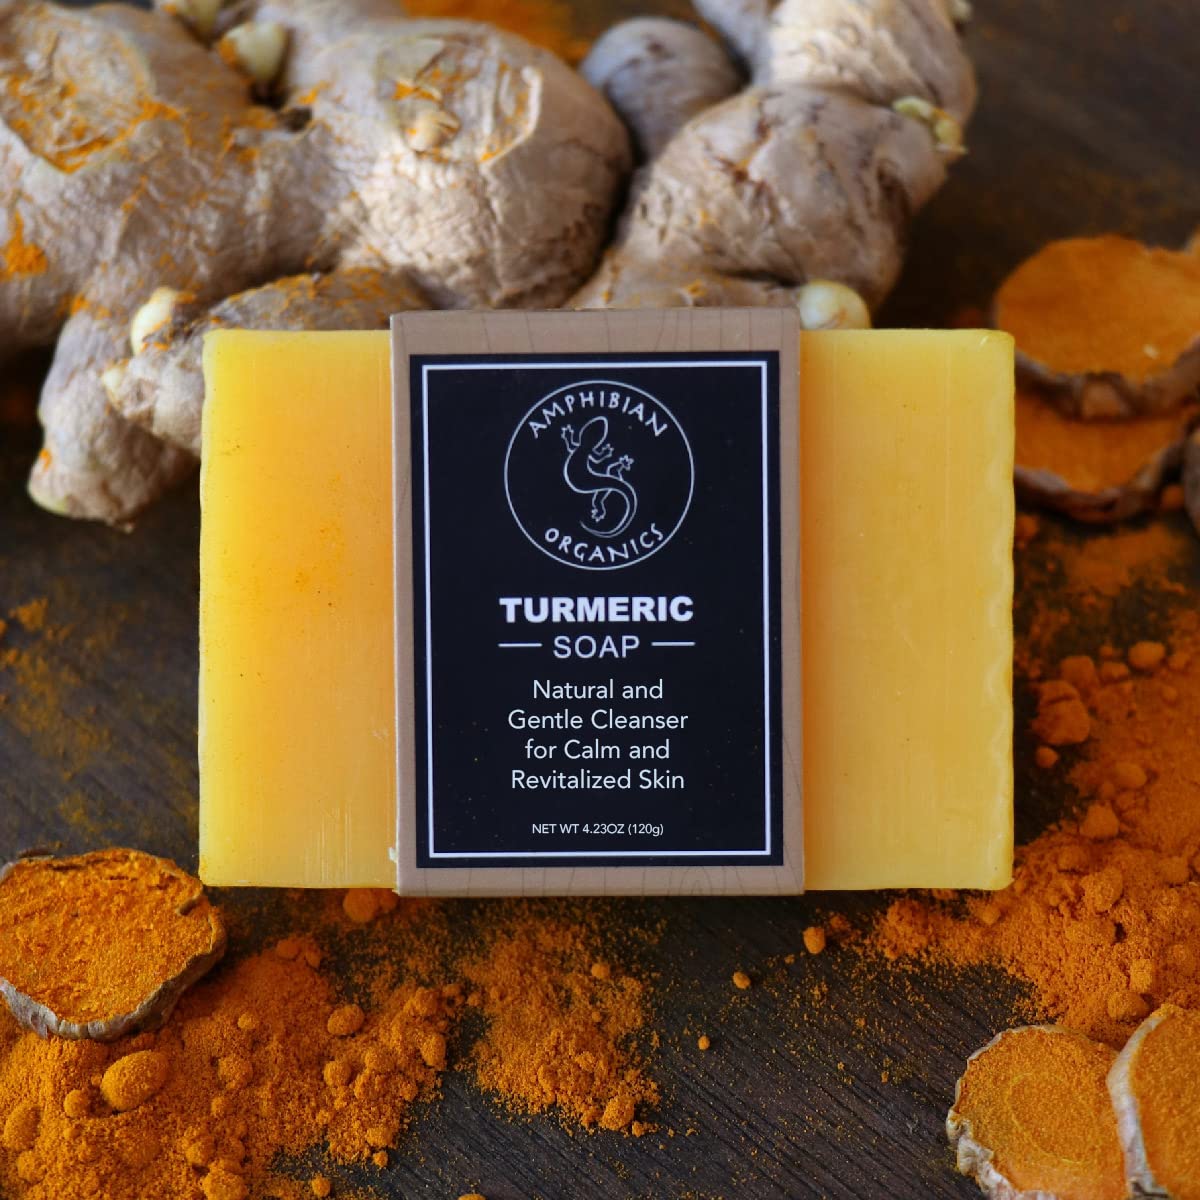 Amphibian Organics Turmeric Soap - All Natural Gentle Cleanser for All Skin Types. No Stain Face  Body Cleanser for Men, Women  Teens.